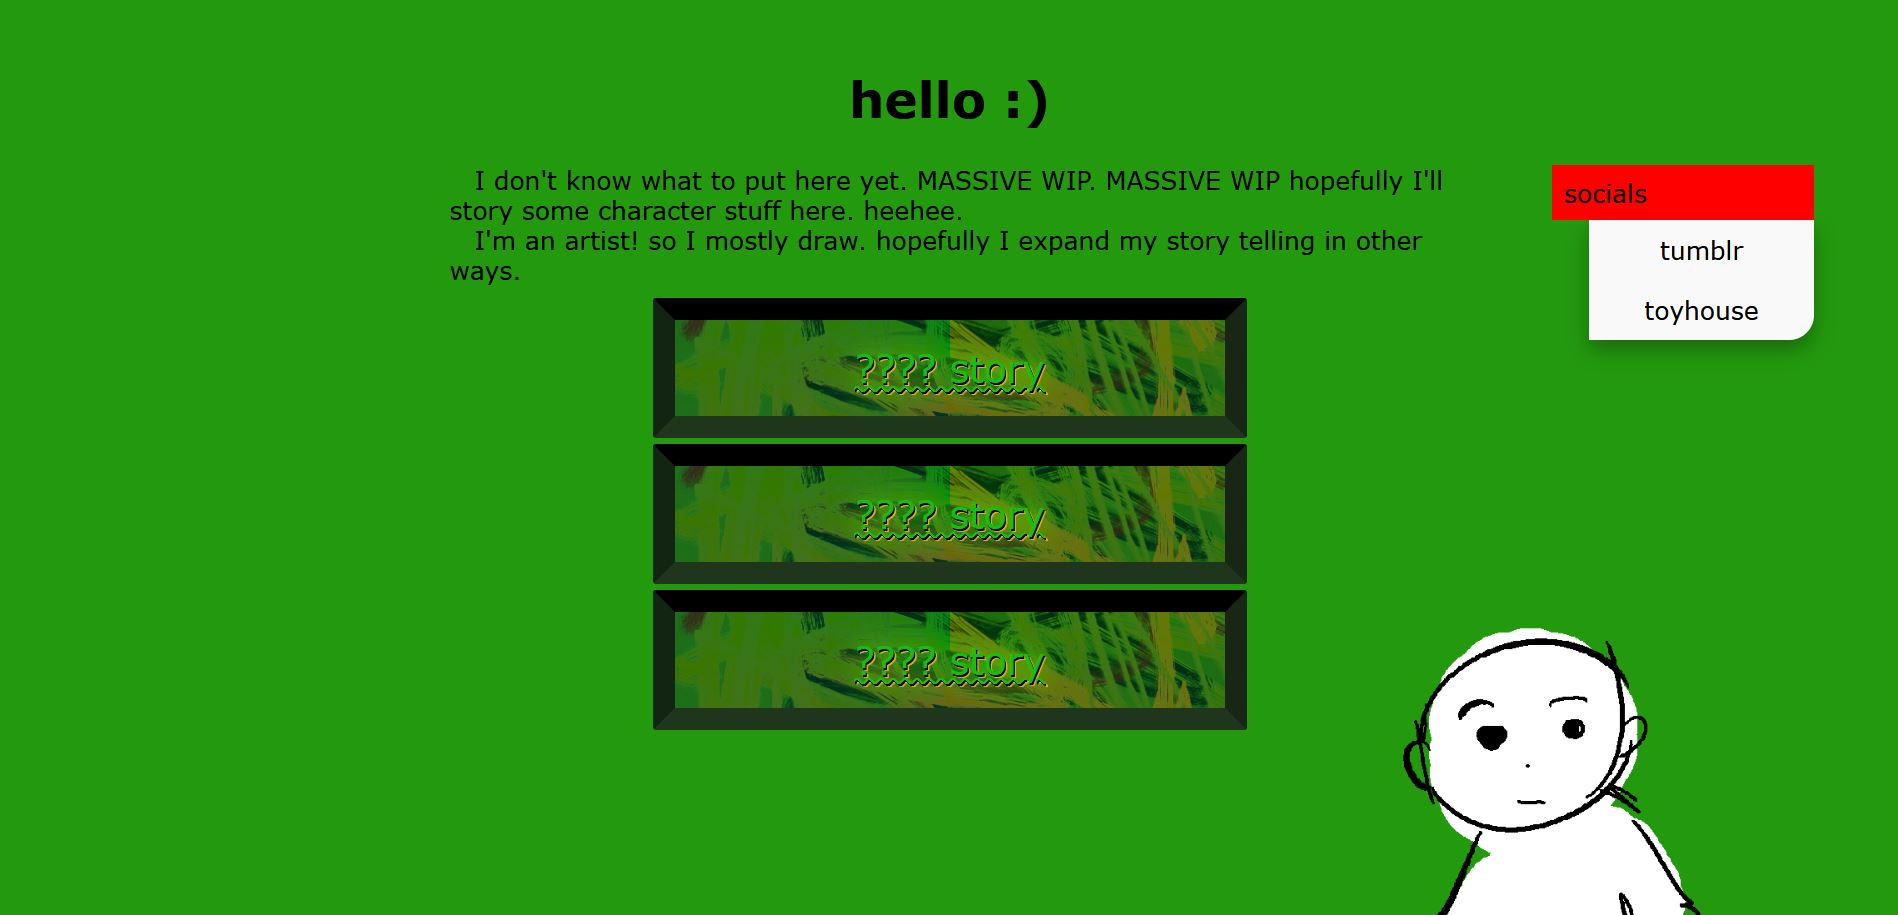 Screenshot of a index page, it has a green background, black centered text, 3 navigation boxes, each with text saying '???? story', and other social media links.